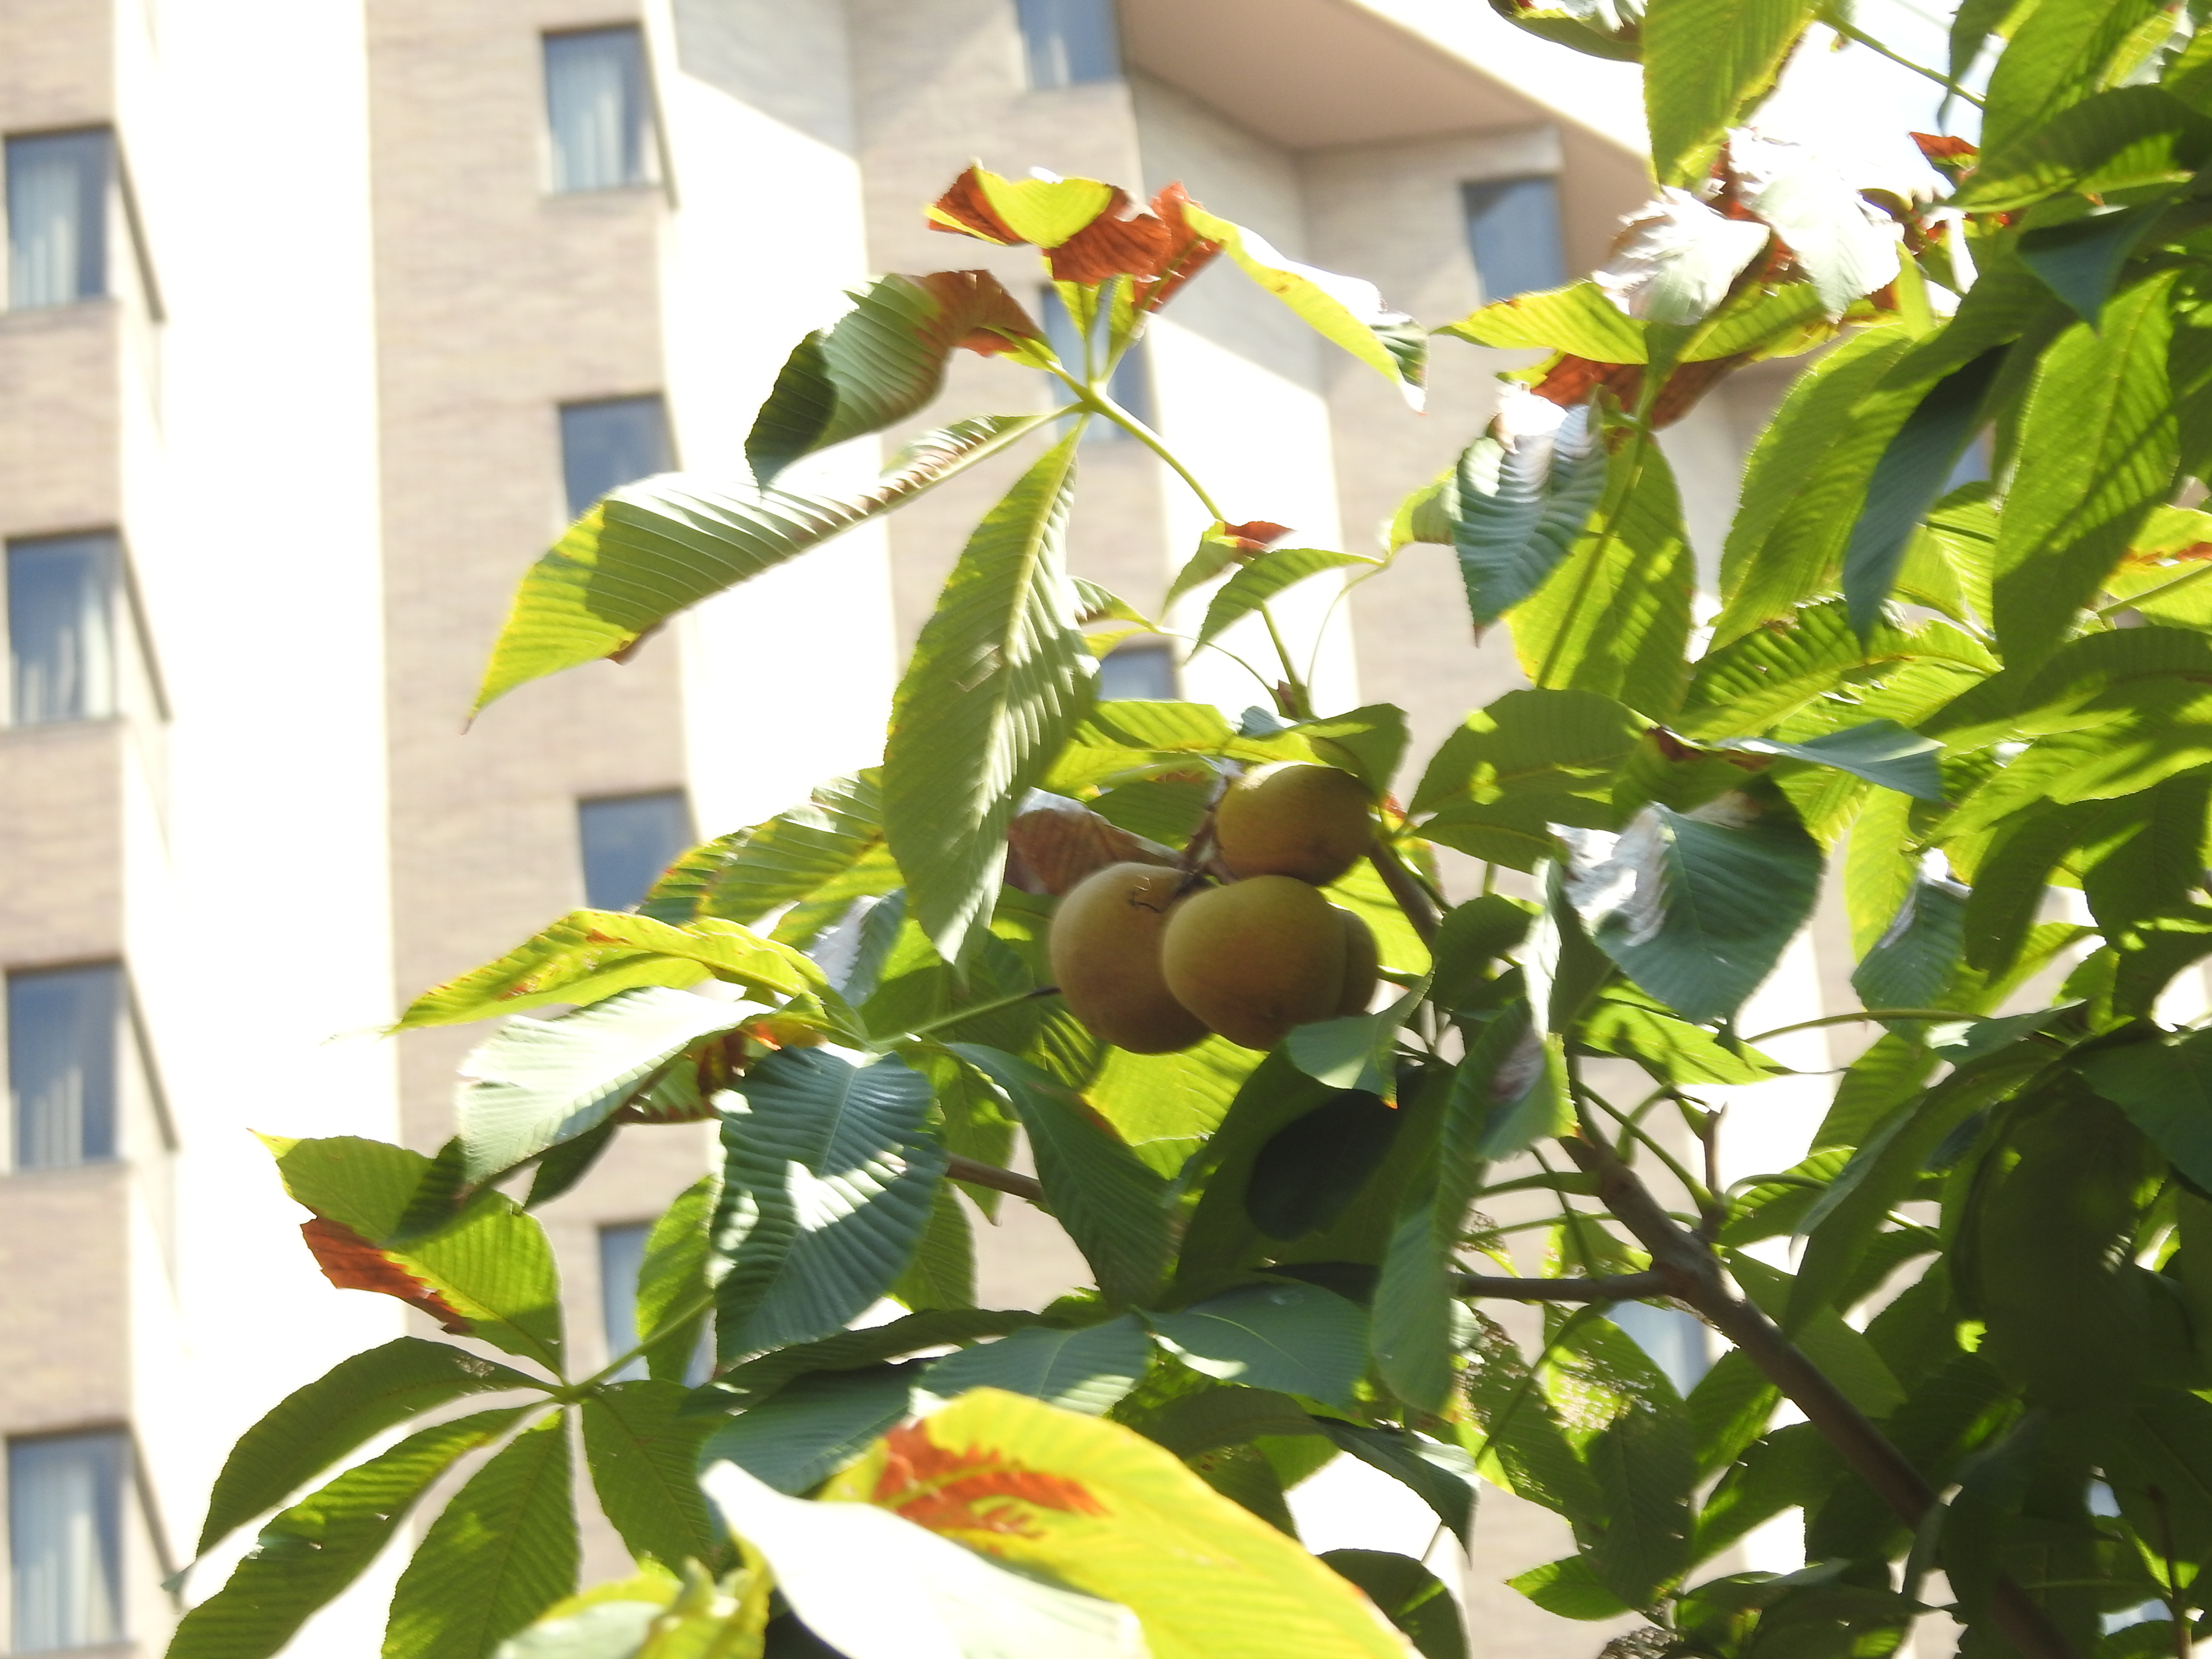 Small, brown fruits that look a bit like kiwis hanging from a tree with a city skyscraper behind it.